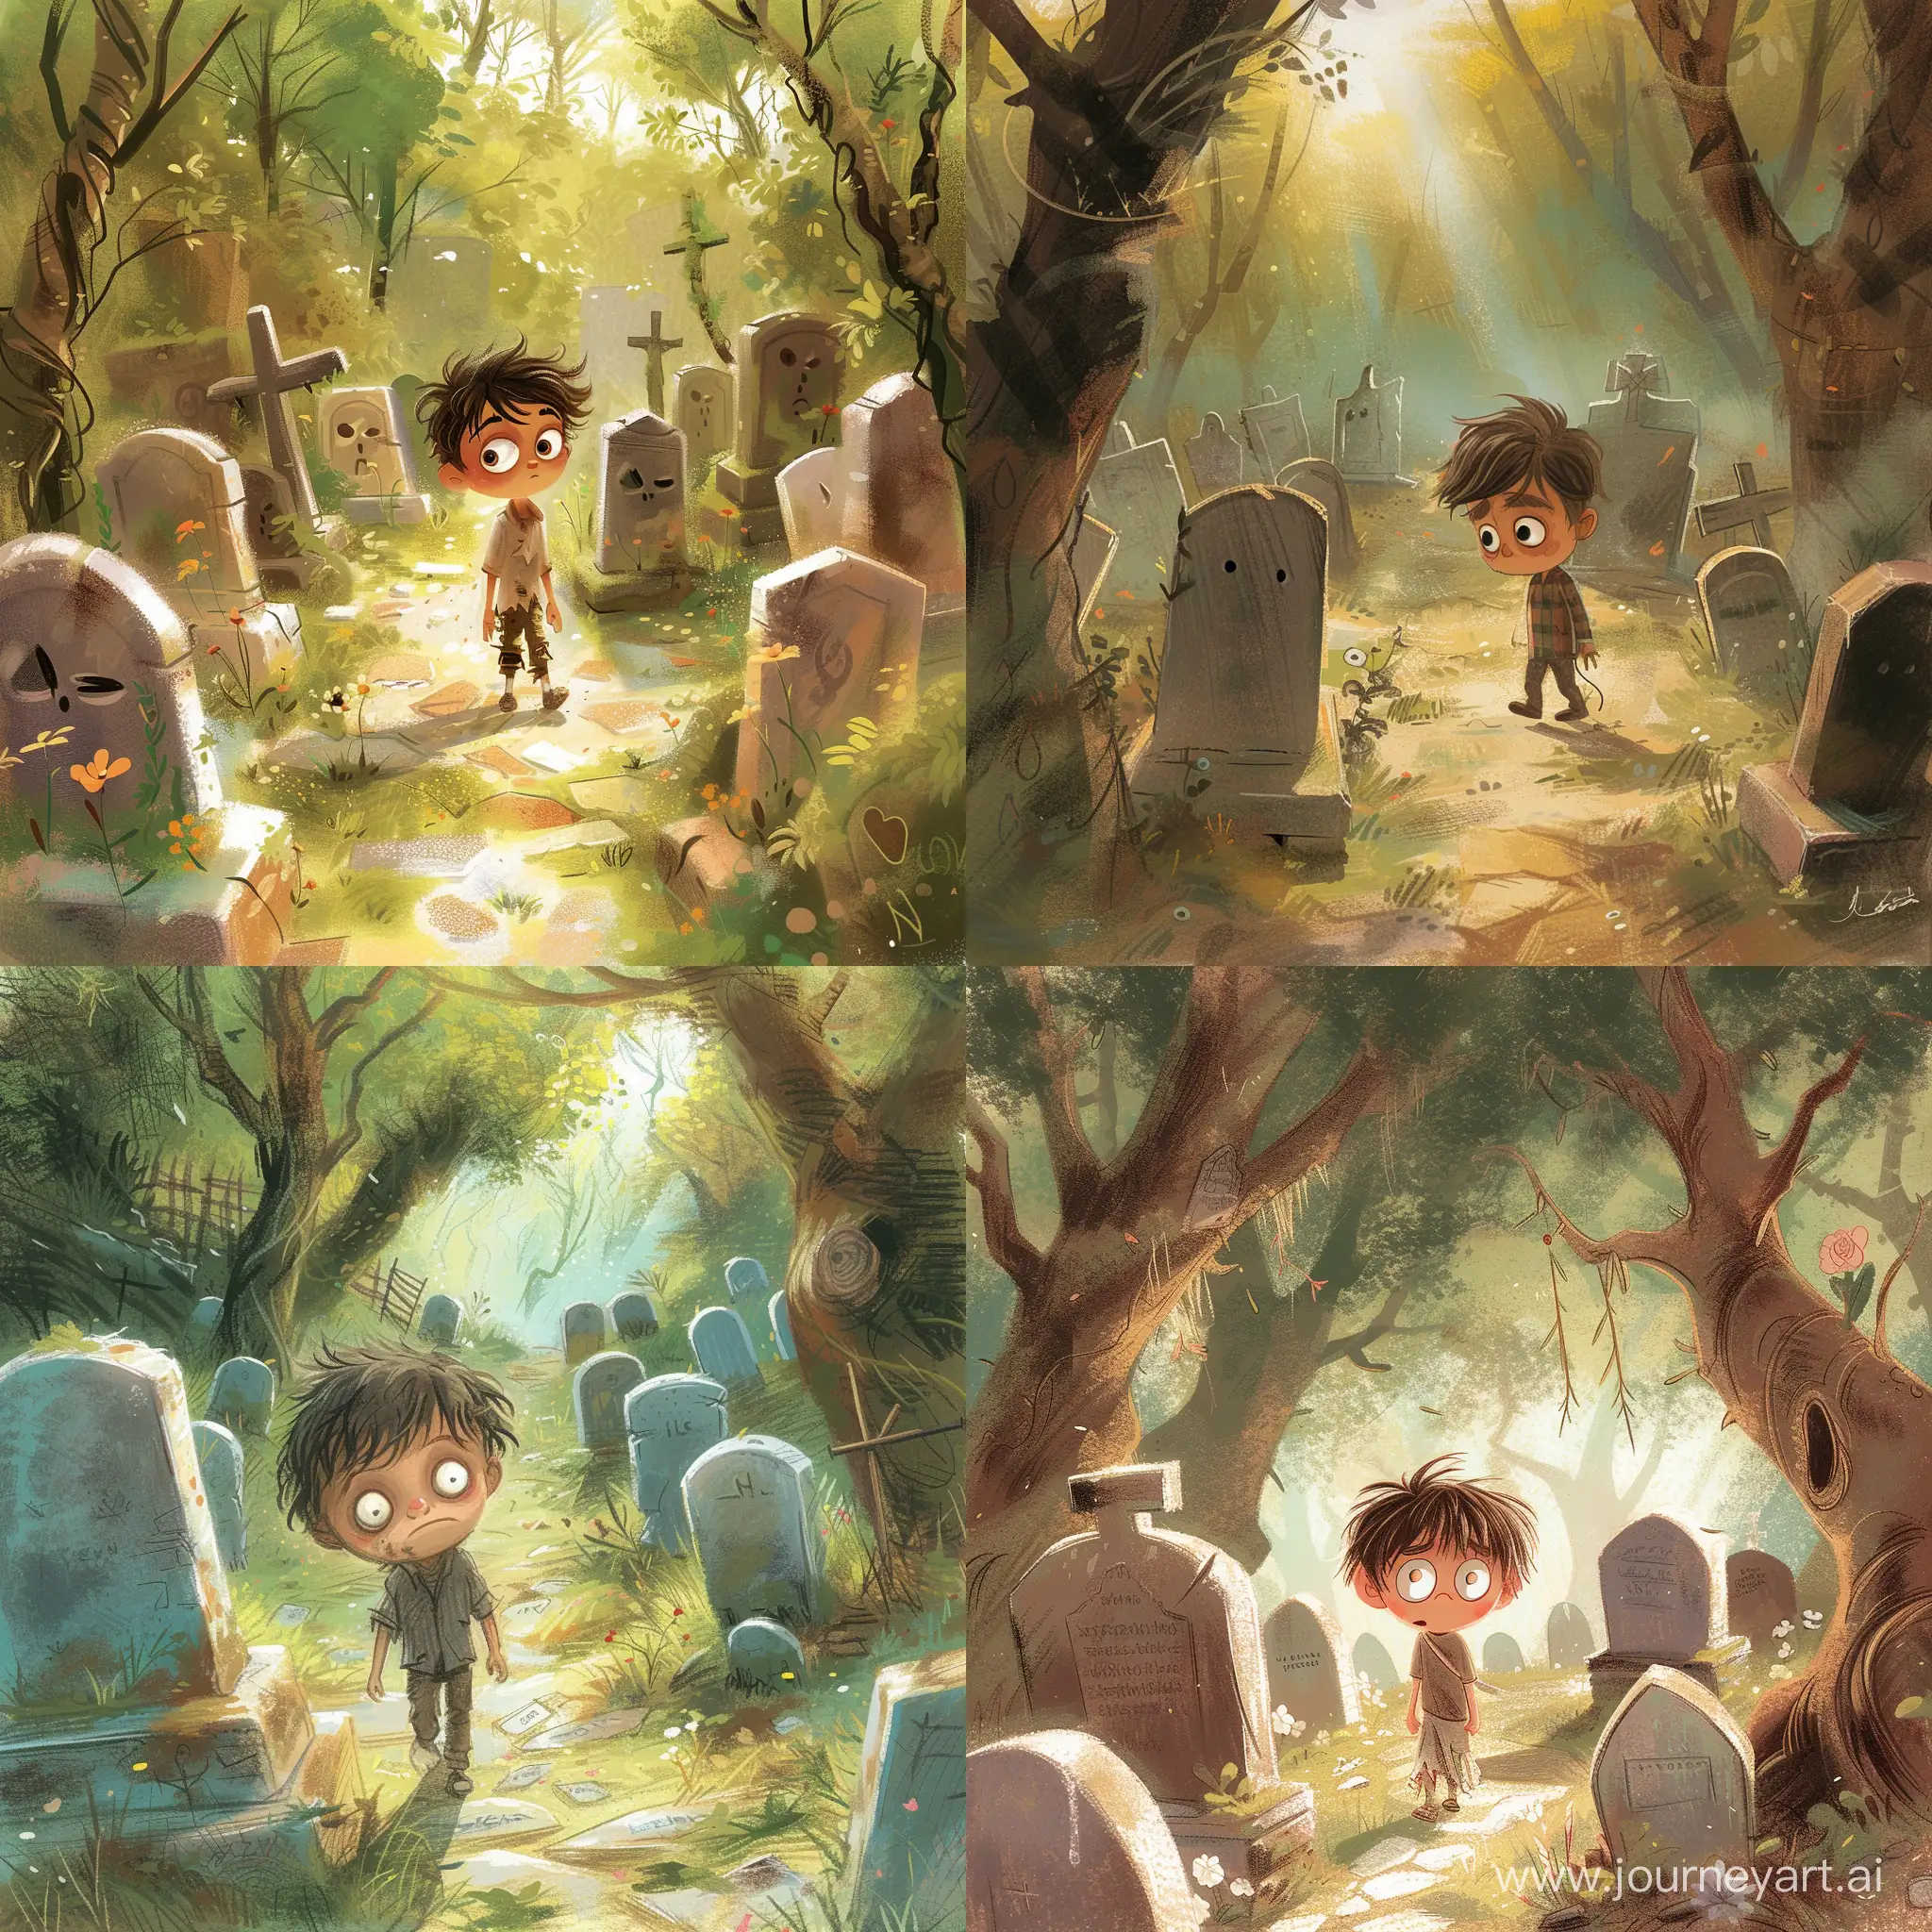 Heartfelt-Visit-Felipes-Journey-to-His-Fathers-Grave-in-a-Gentle-Childrens-Book-Illustration